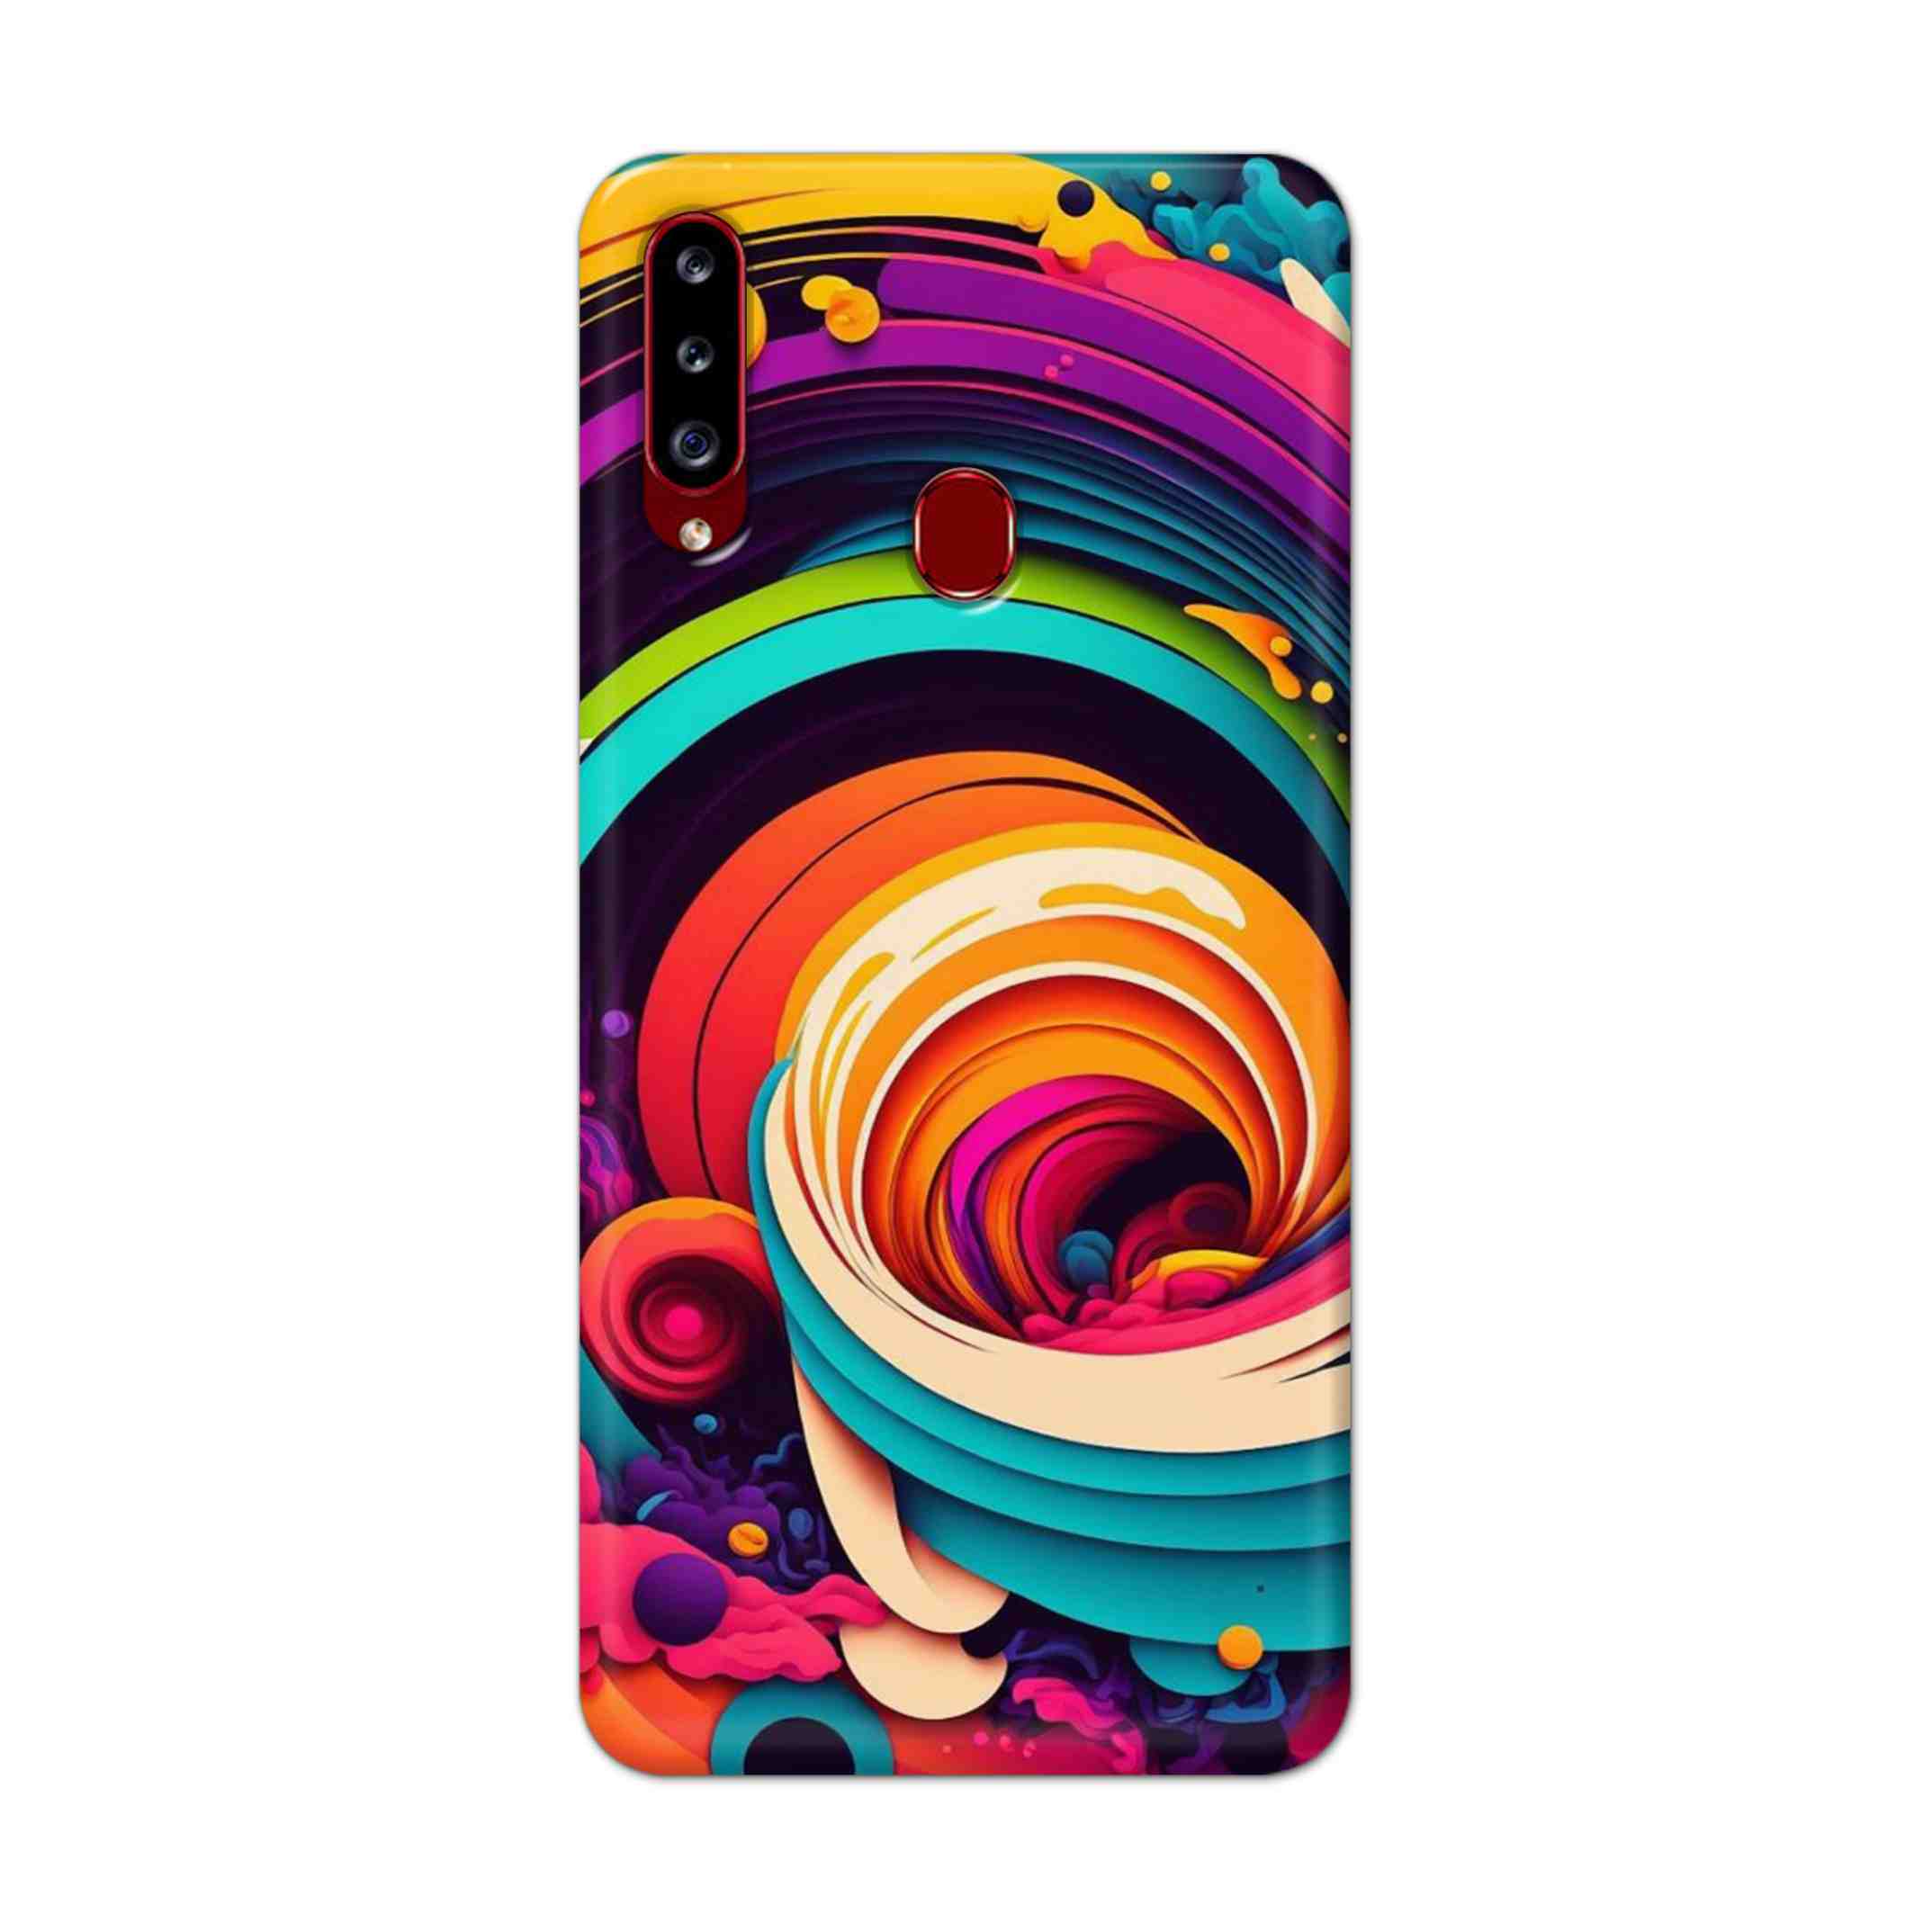 Buy Colour Circle Hard Back Mobile Phone Case Cover For Samsung A20s Online